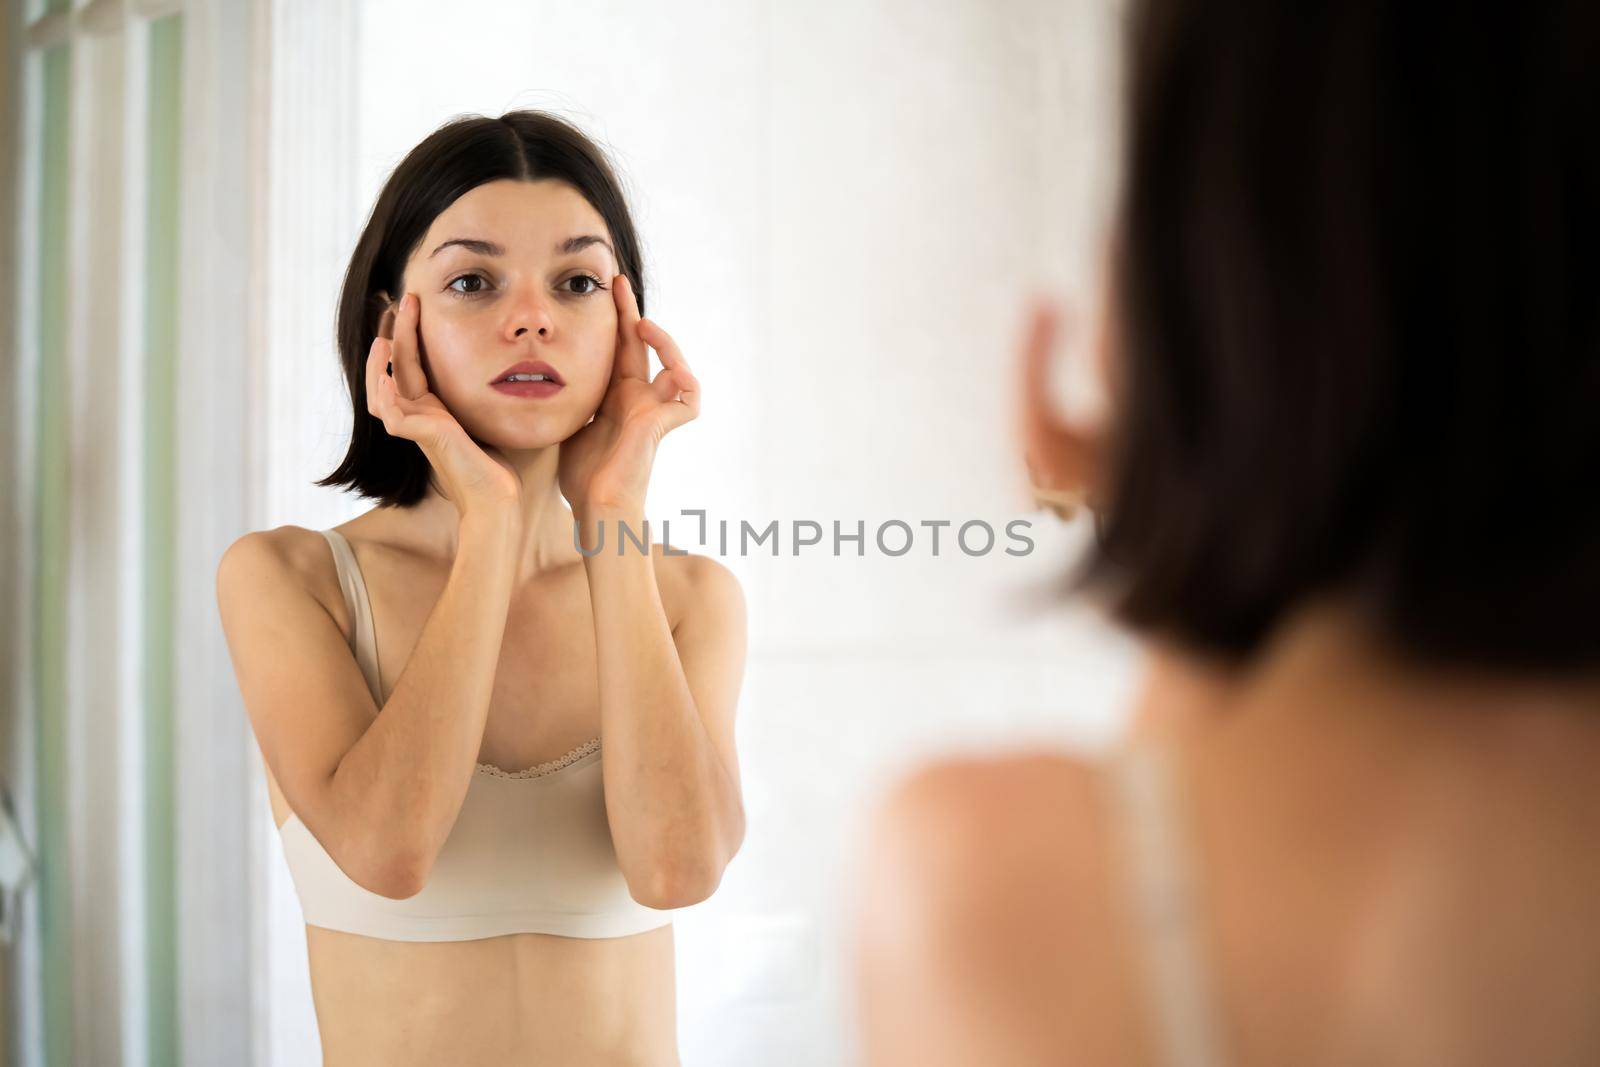 A young girl touches her delicate, clean, moisturized face skin with her hands, a woman takes care of the health and beauty of her body in the bathroom.